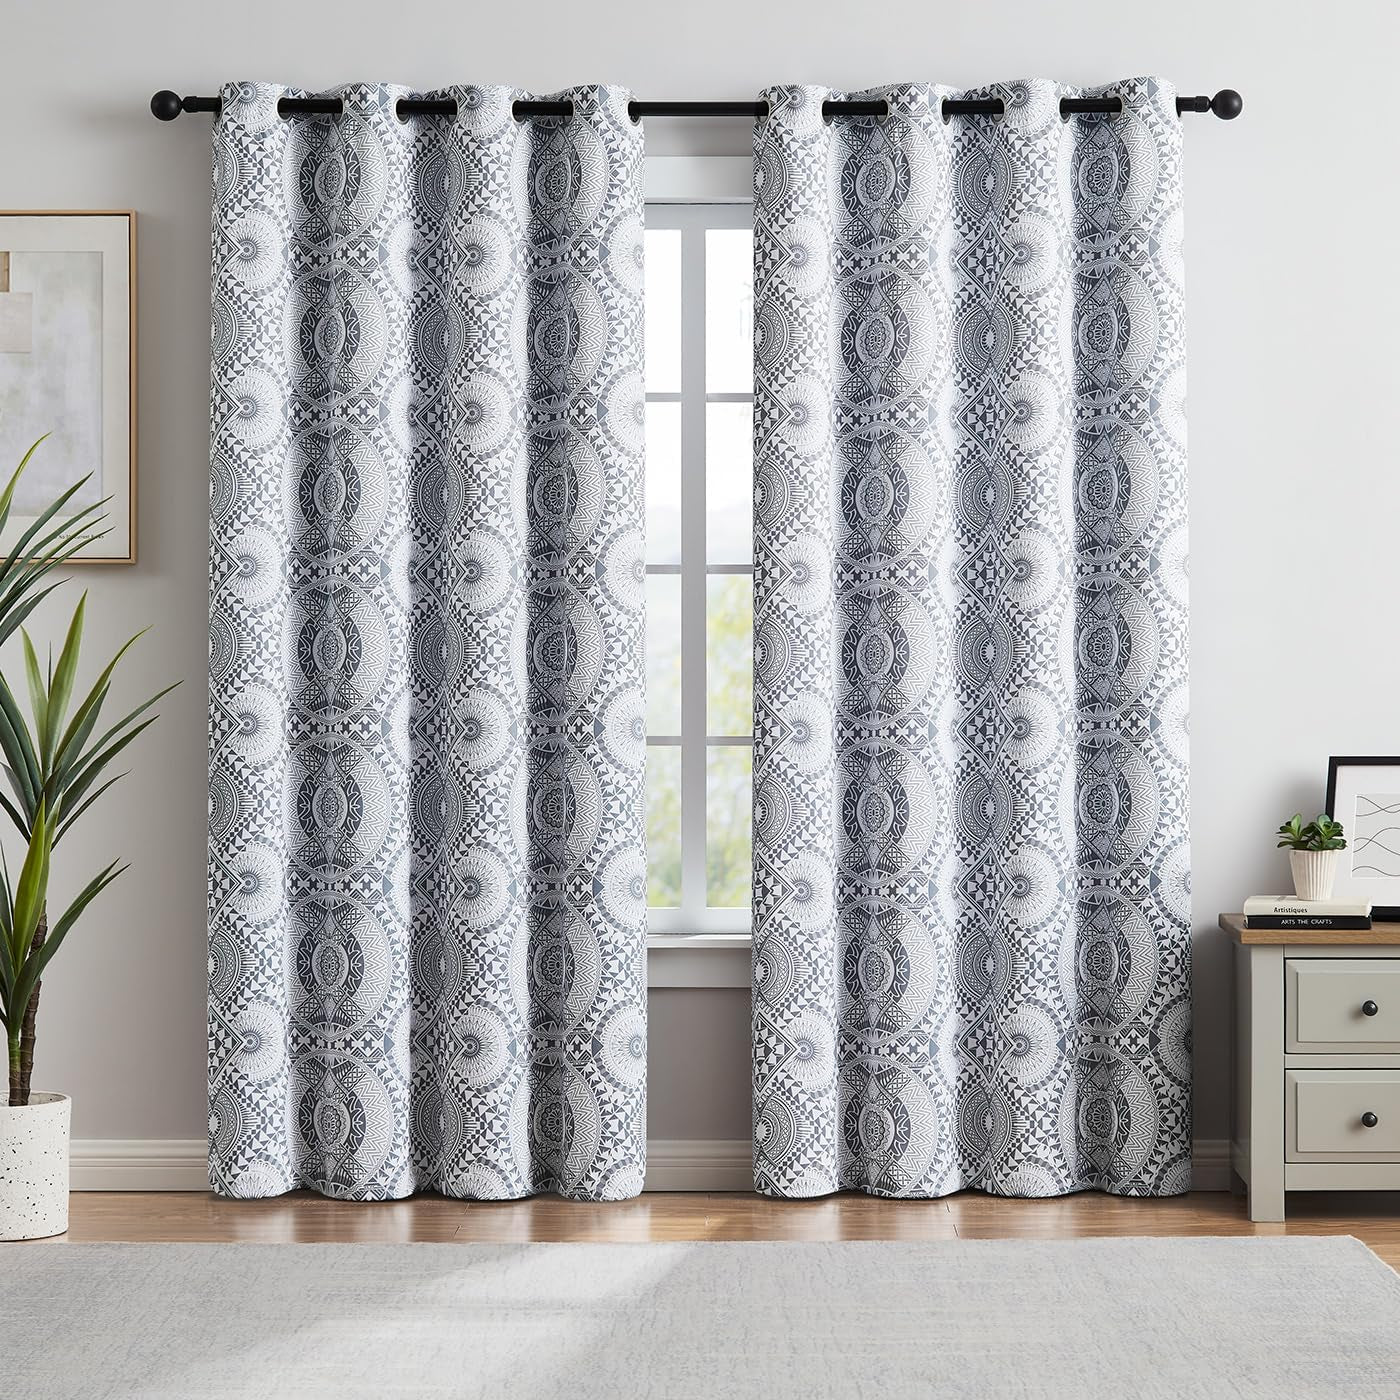 Metallic Geo Blackout Curtain Panels for Bedroom Thermal Insulated Light Blocking Foil Trellis Moroccan Window Treatments Diamond Grommet Drapes for Living-Room, Set of 2, 50" X 84", Beige/Gold  ugoutry Ethic Grey 50"X84"X2 